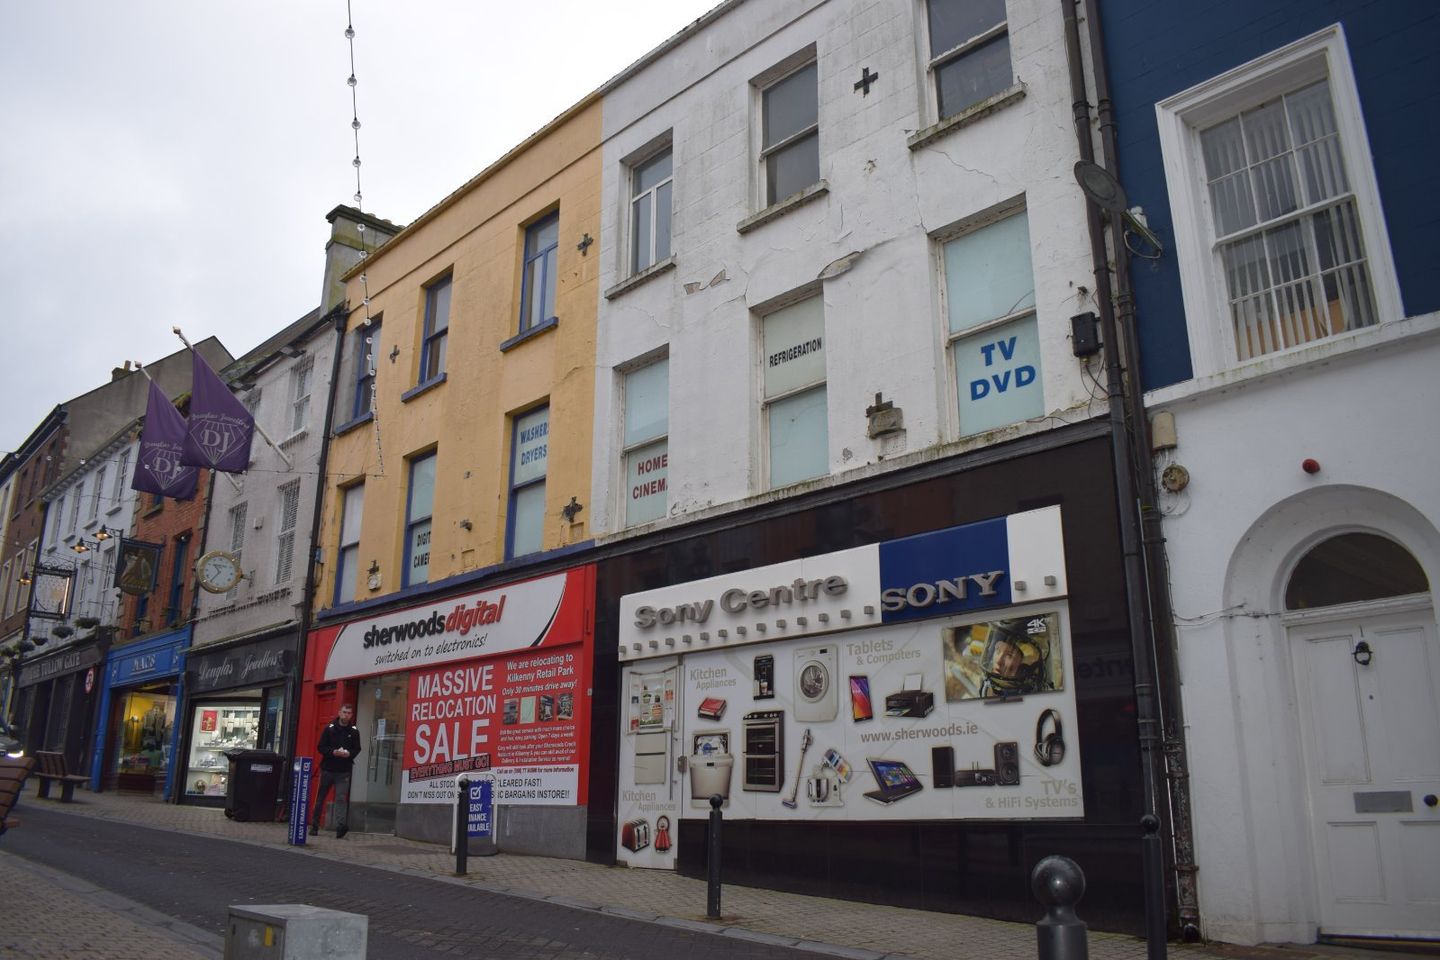 2/3/4 Units, Tullow Street, Carlow Town, Co. Carlow, R93D2Y8